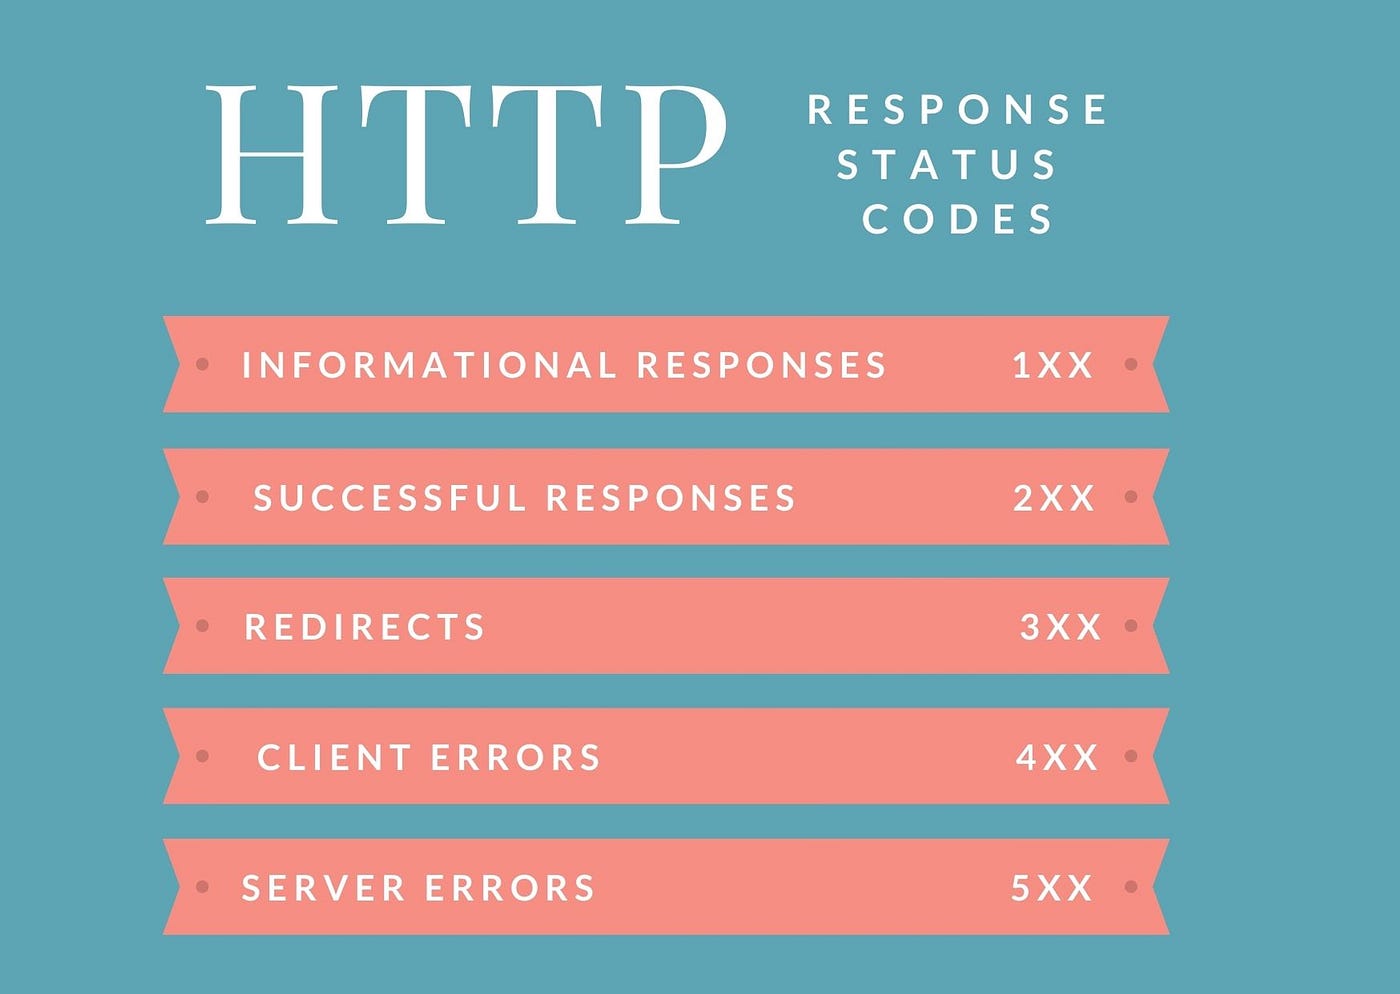 HTTP Status Codes - From the 100s to the 500s